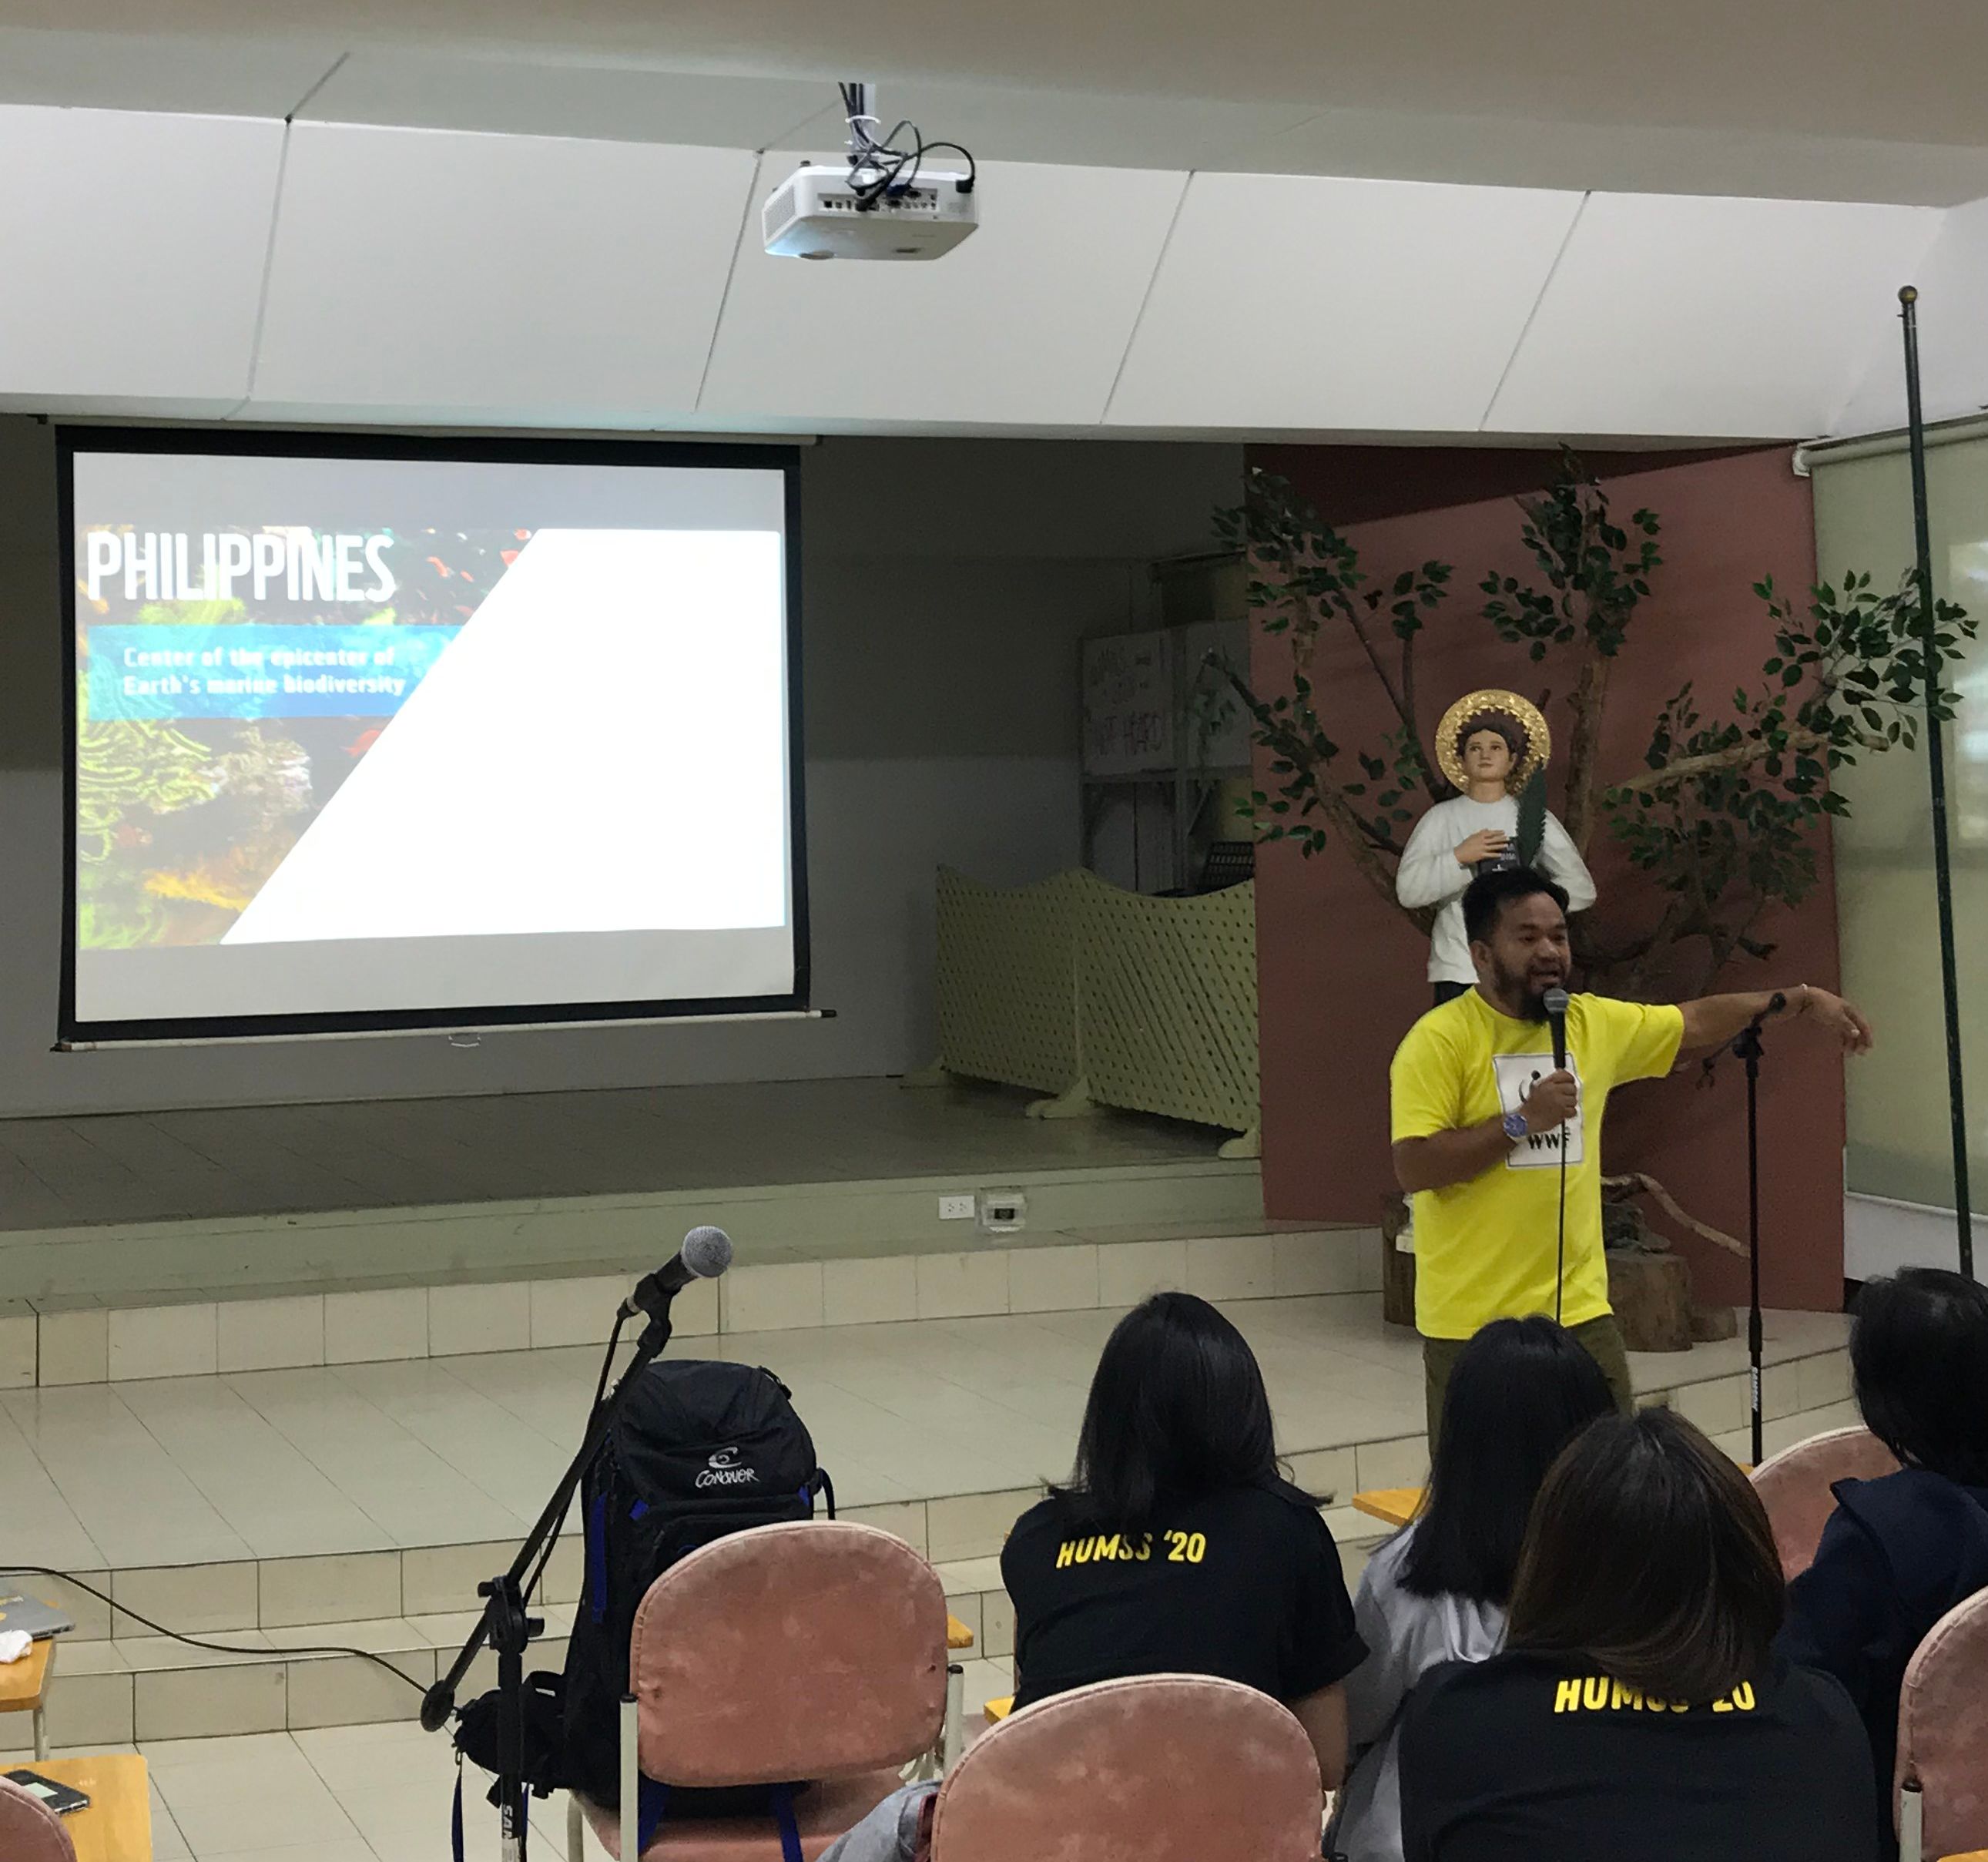 <h1>WWF-PH at the HUMSS Congress 2019</h1>
<p>Last February 27, 2019, World Wide Fund for Nature (WWF) Philippines’ The Sustainable Diner: A Key Ingredient for </p>
<p style="text-align: right;"><a href="https://support.wwf.org.ph/what-we-do/food/thesustainablediner/humss-congress-2019/" target="_blank">Read More &gt;</a></p>